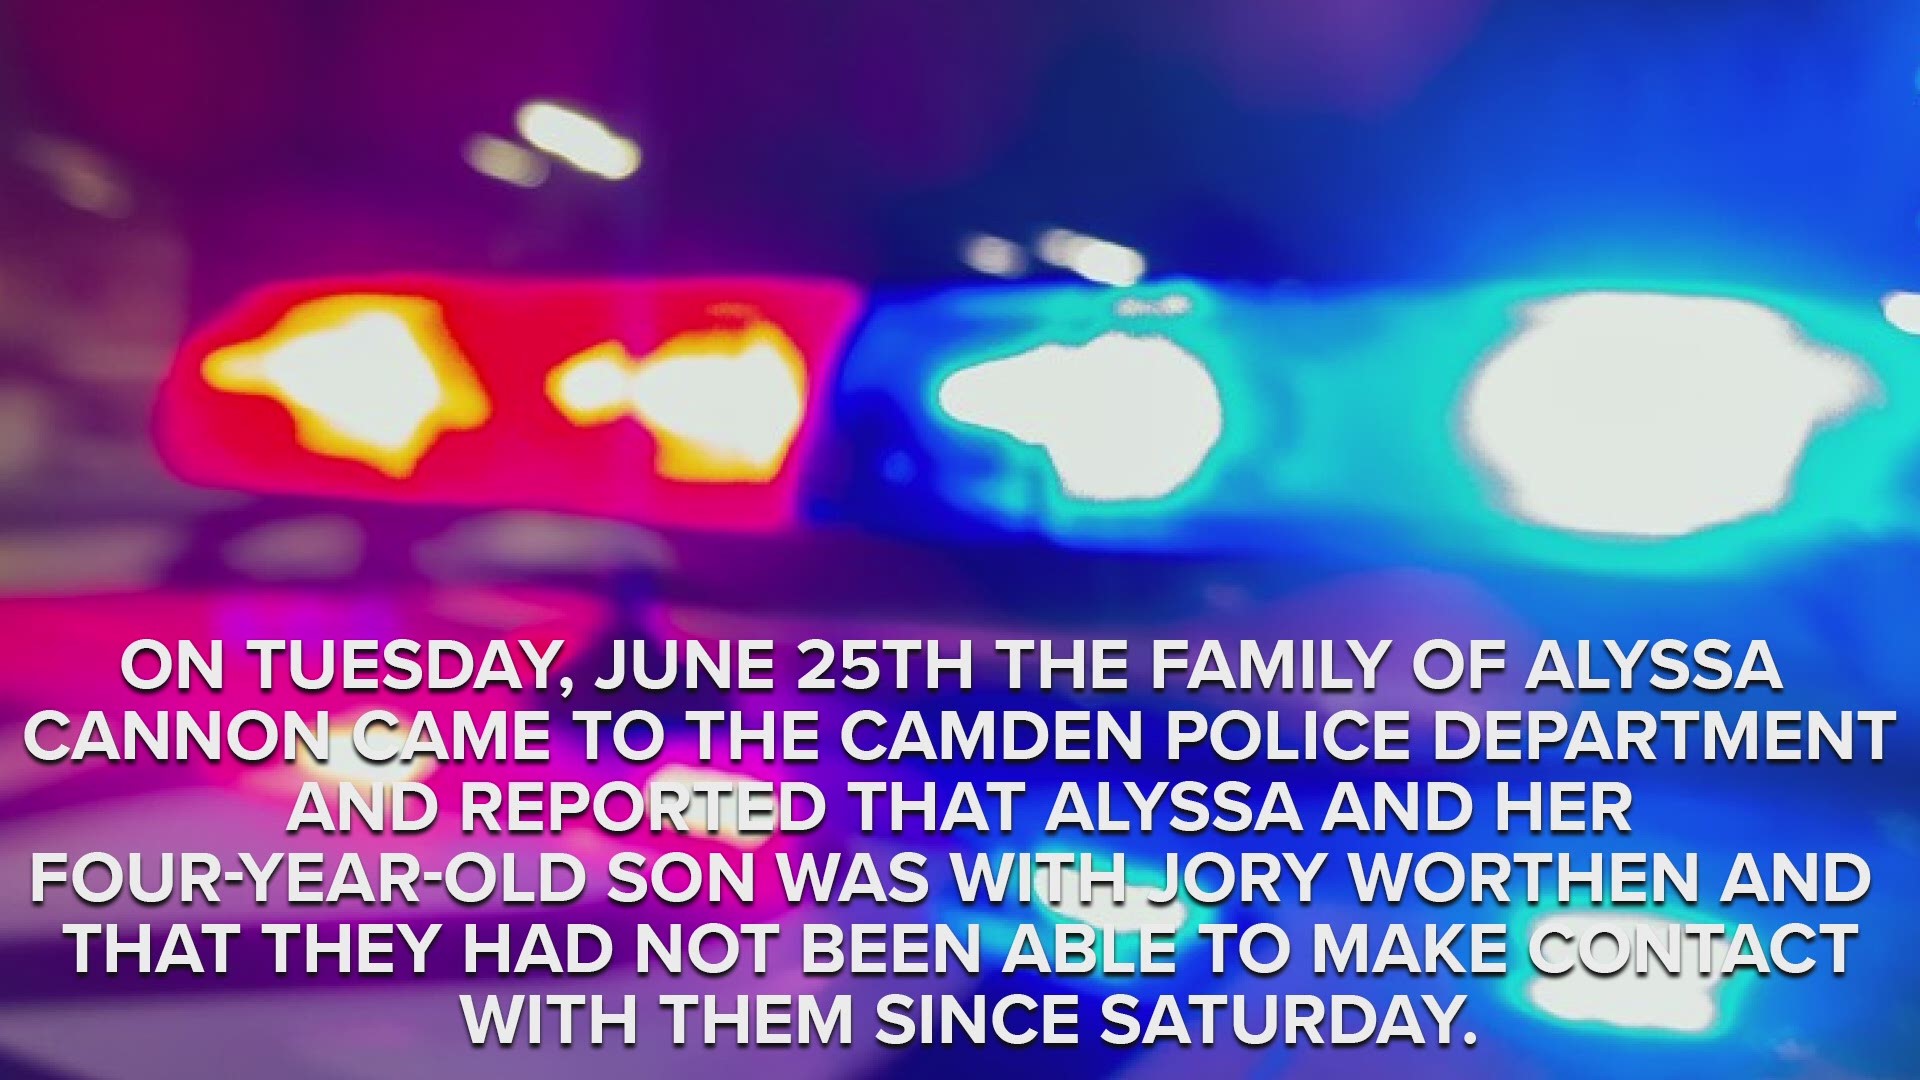 According to the Camden Police Department, Alyssa Cannon and her four-year-old son were found dead June 25, at approximately 12:45 p.m.